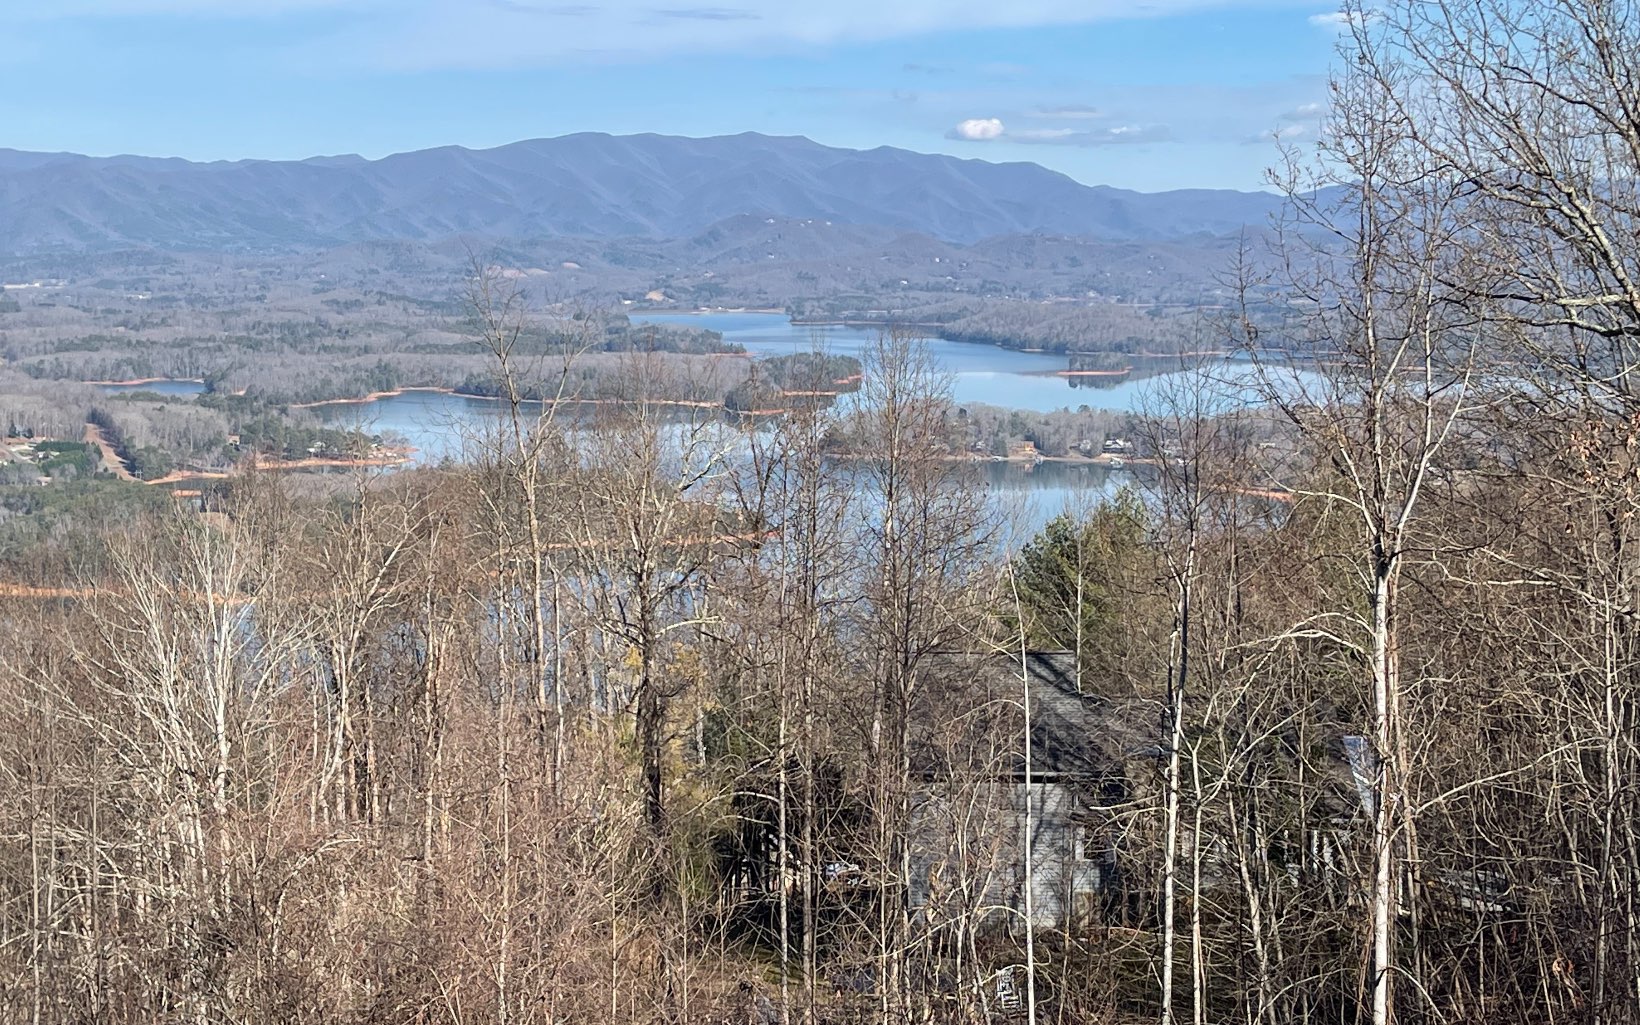 SPECTACULAR VIEWS LAKE CHATUGE & SURROUNDING MOUNTAINS! Located in the North Georgia Mountains in a well established subdivision, this lot offers awesome views, county water and underground utilities. The perfect location to build your mountain retreat!